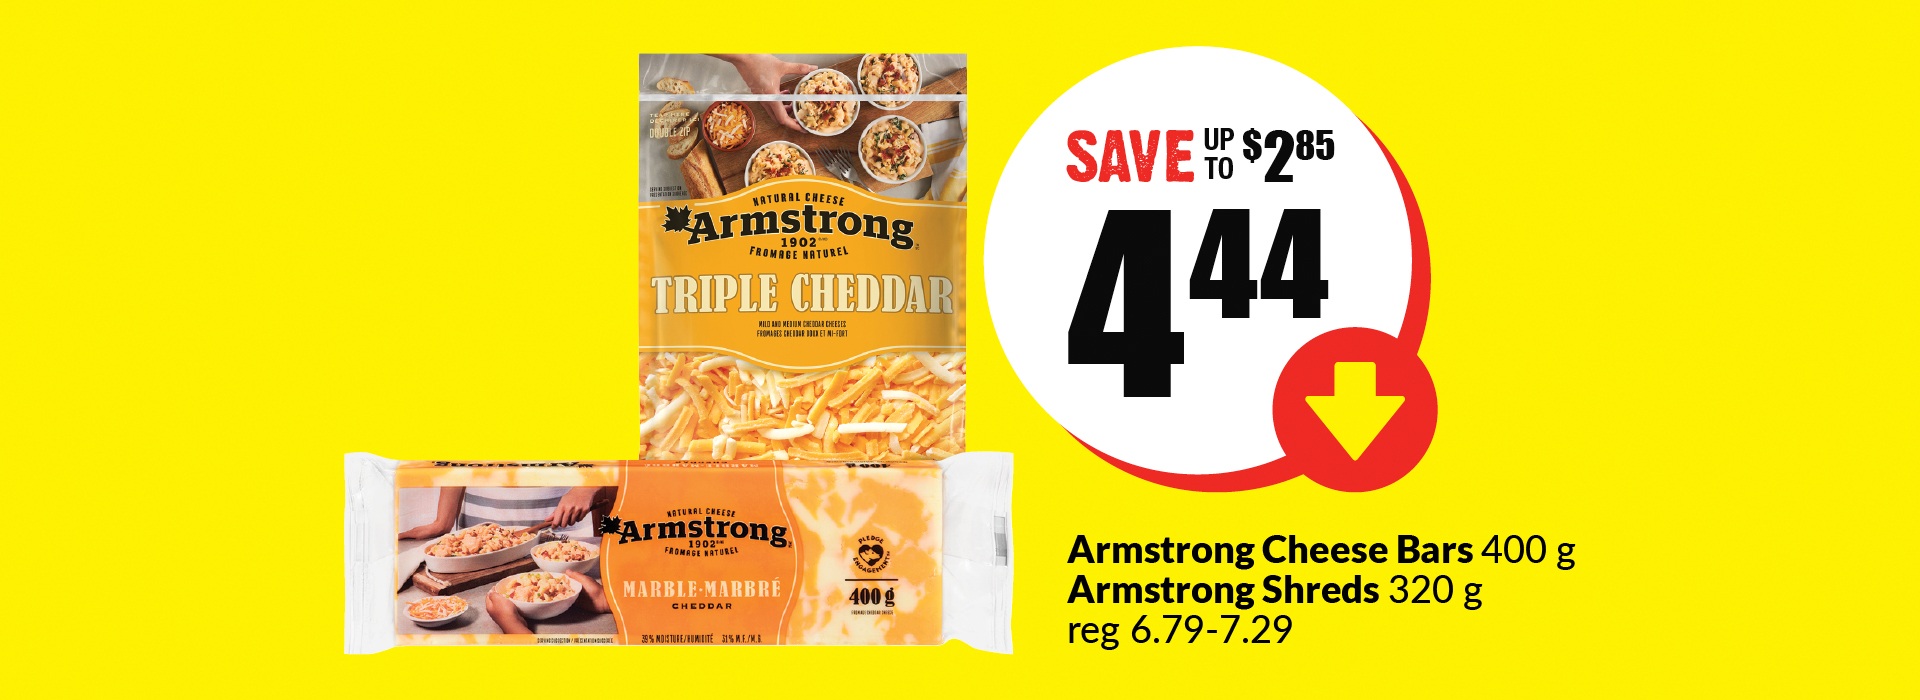 Armstrong cheese bars